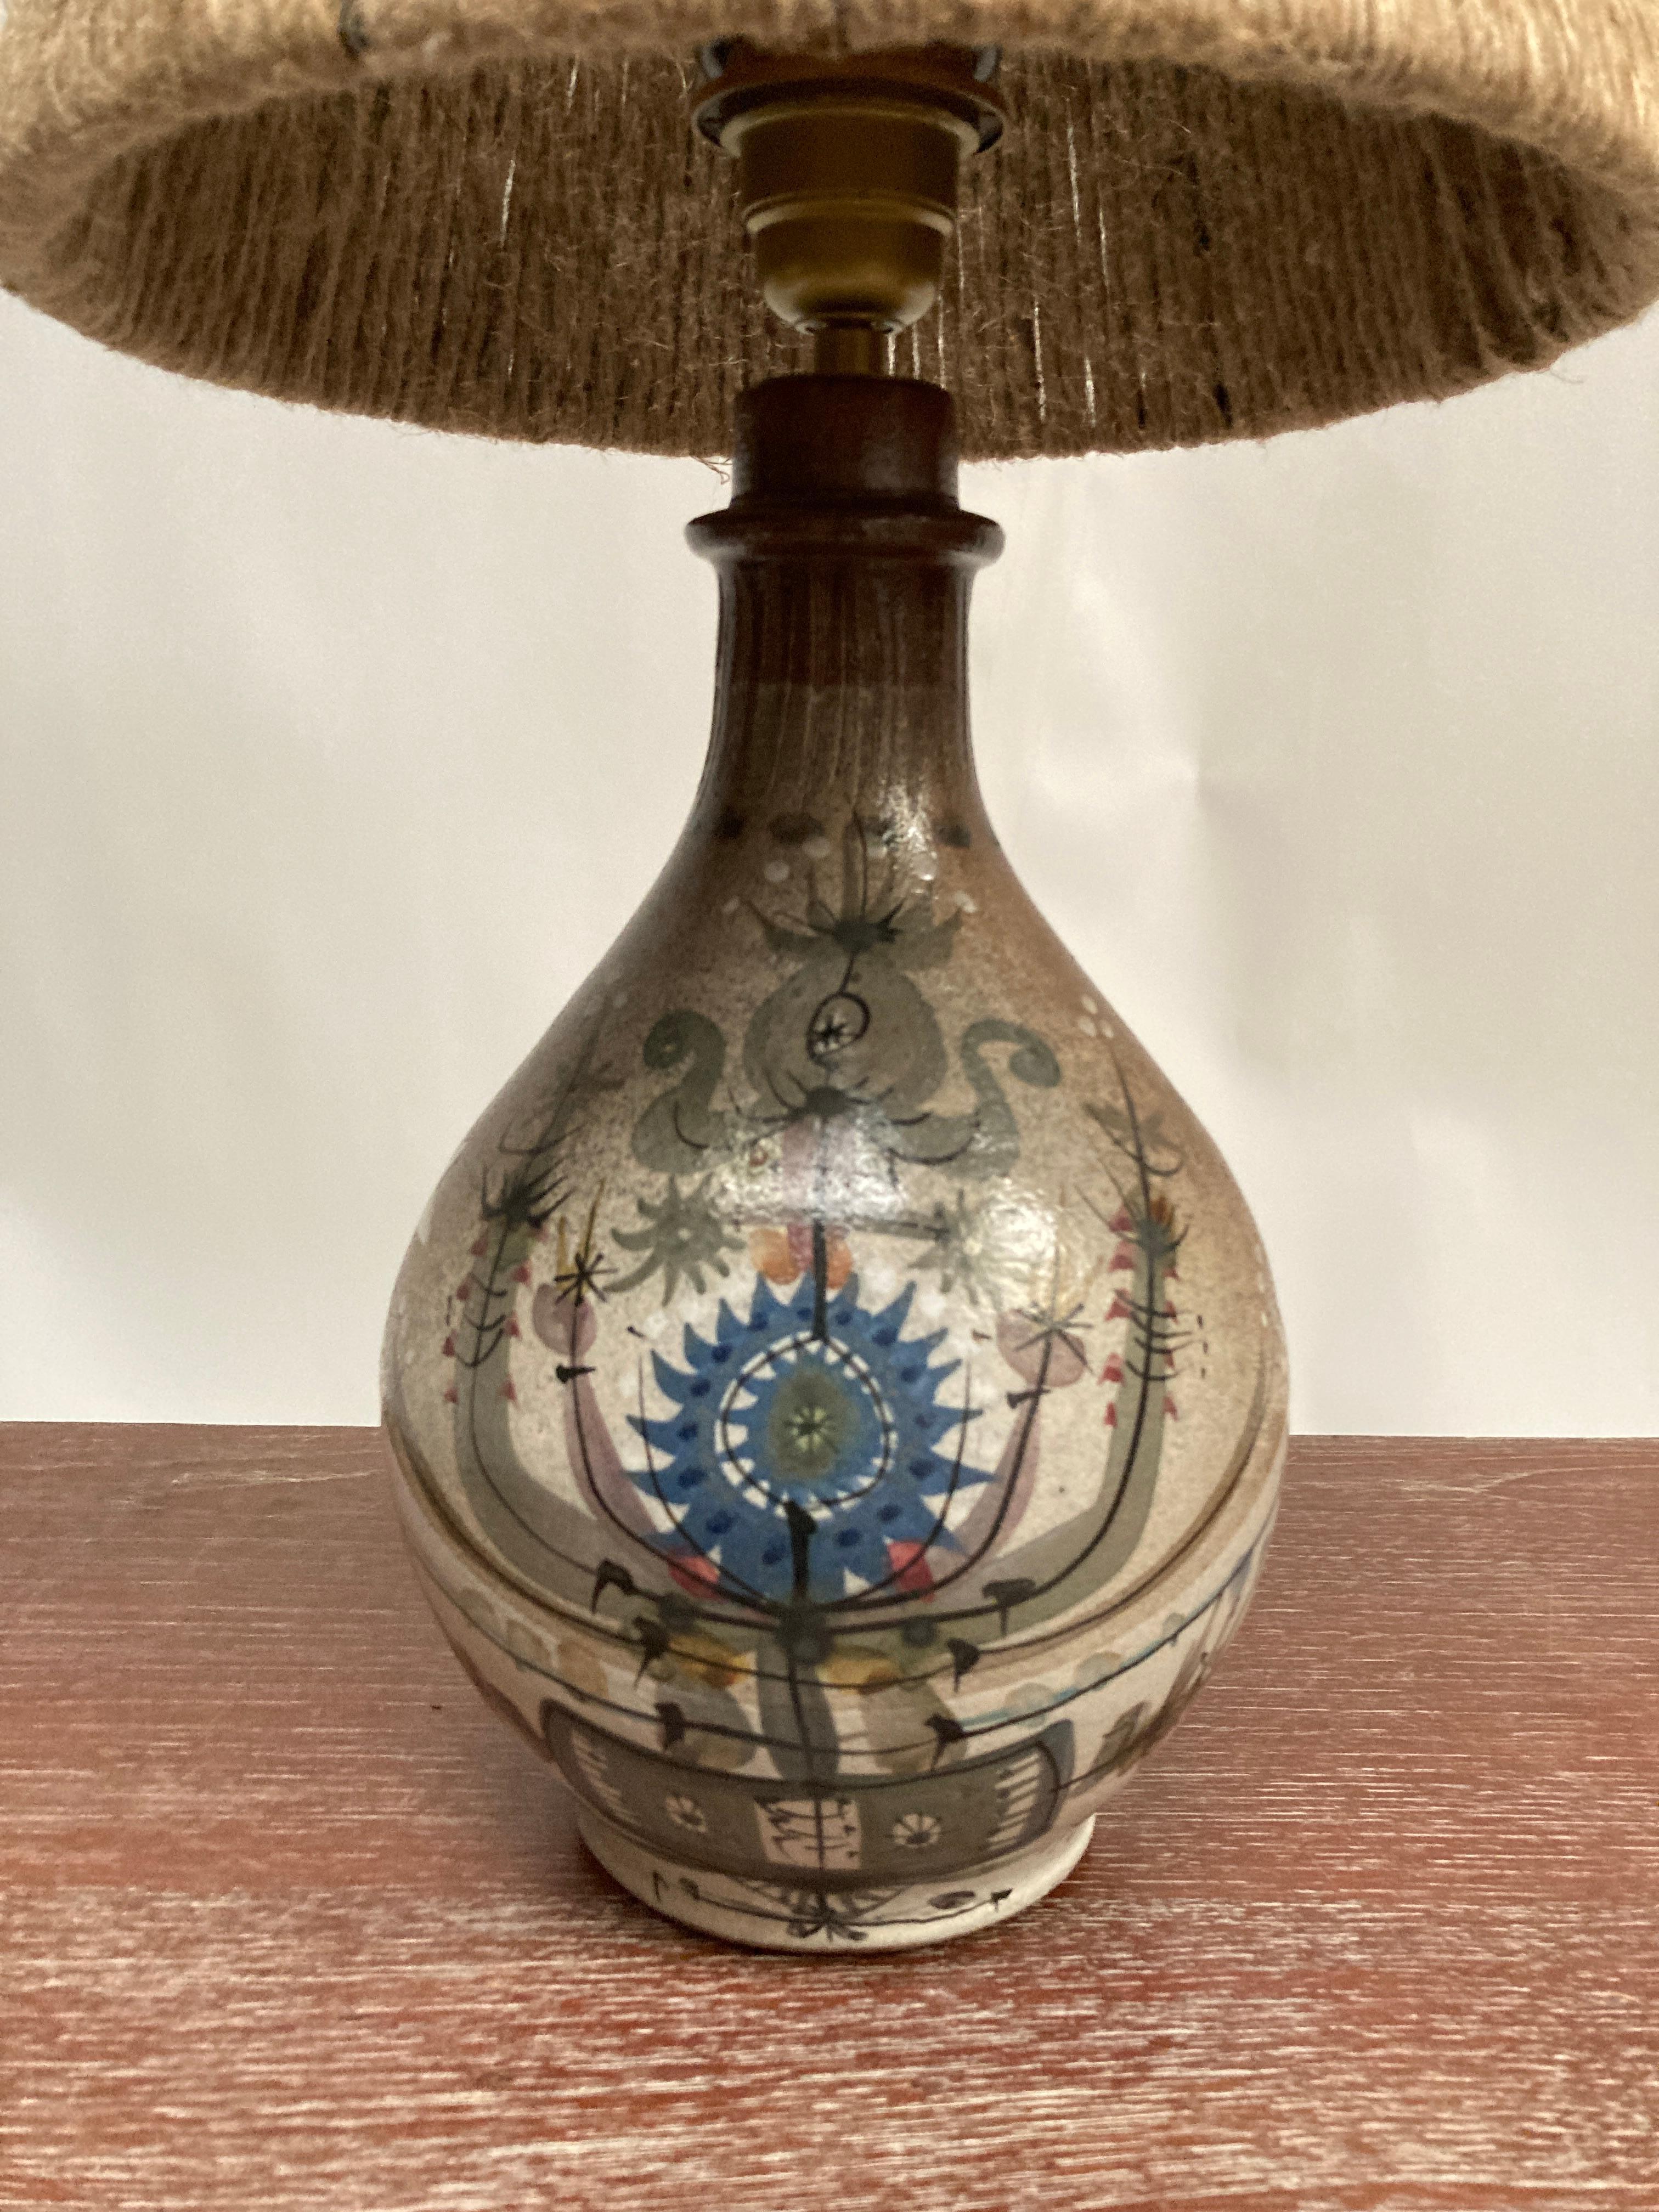 1960's Studio pottery ceramic lamp by ANDRÉ L'HELGUEN
Quimper Kerluc West of France
Hand made
Dimensions given without shade
No shade included